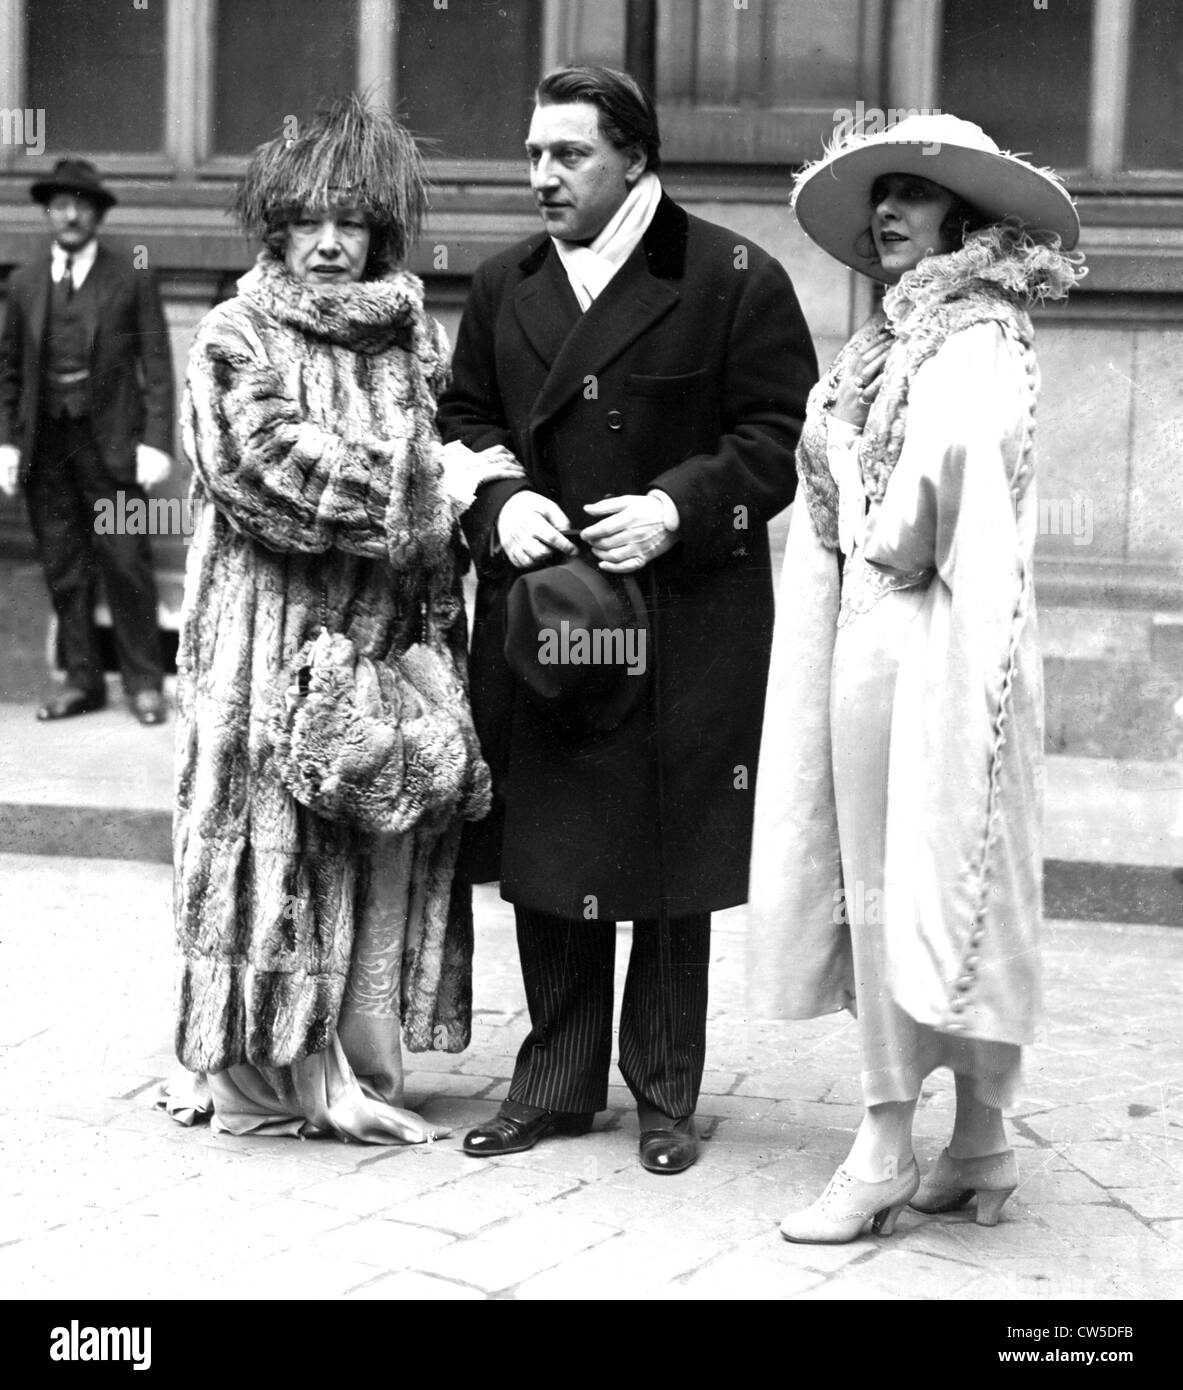 Wedding of Sacha Guitry and Yvonne Printemps. Sacha Guitry, Yvonne Printemps and Sarah Bernhardt. Stock Photo